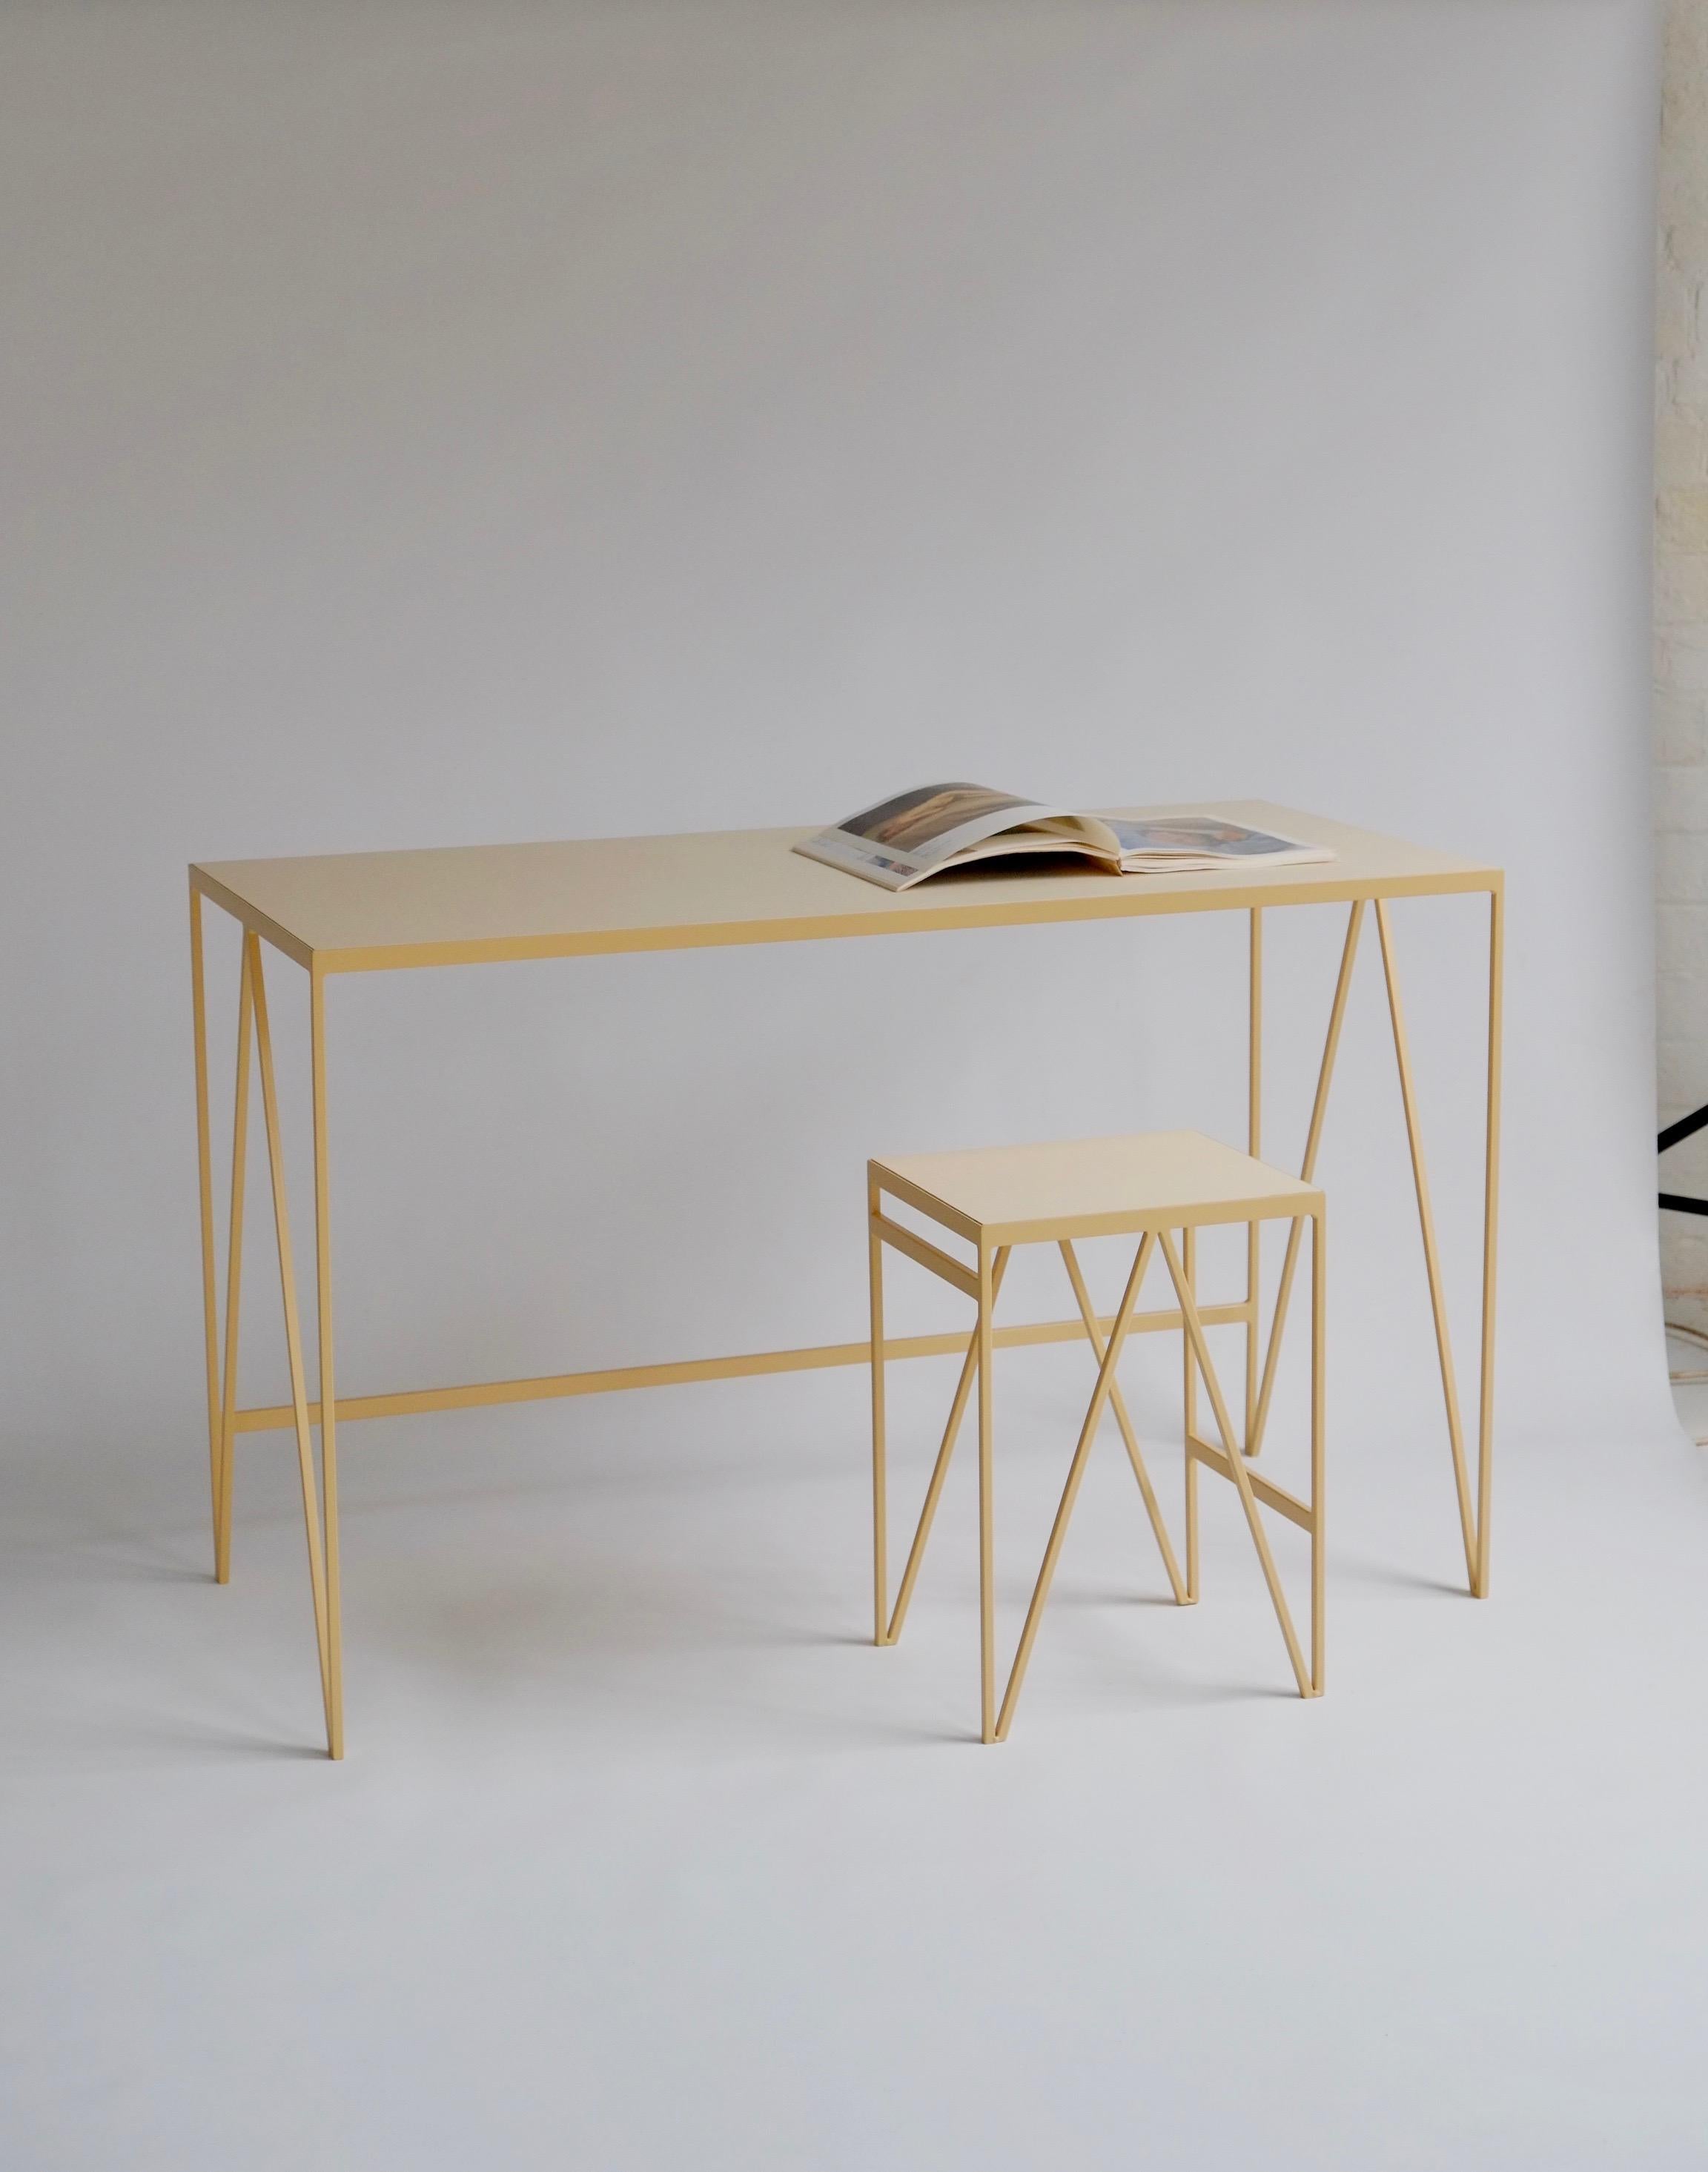 The study desk is made with a butternut powder-coated steel frame and a pearl coloured natural linoleum tabletop. The linoleum for our desks is selected for the ecological properties of the linseed of which it is made. It also has a smooth and hard